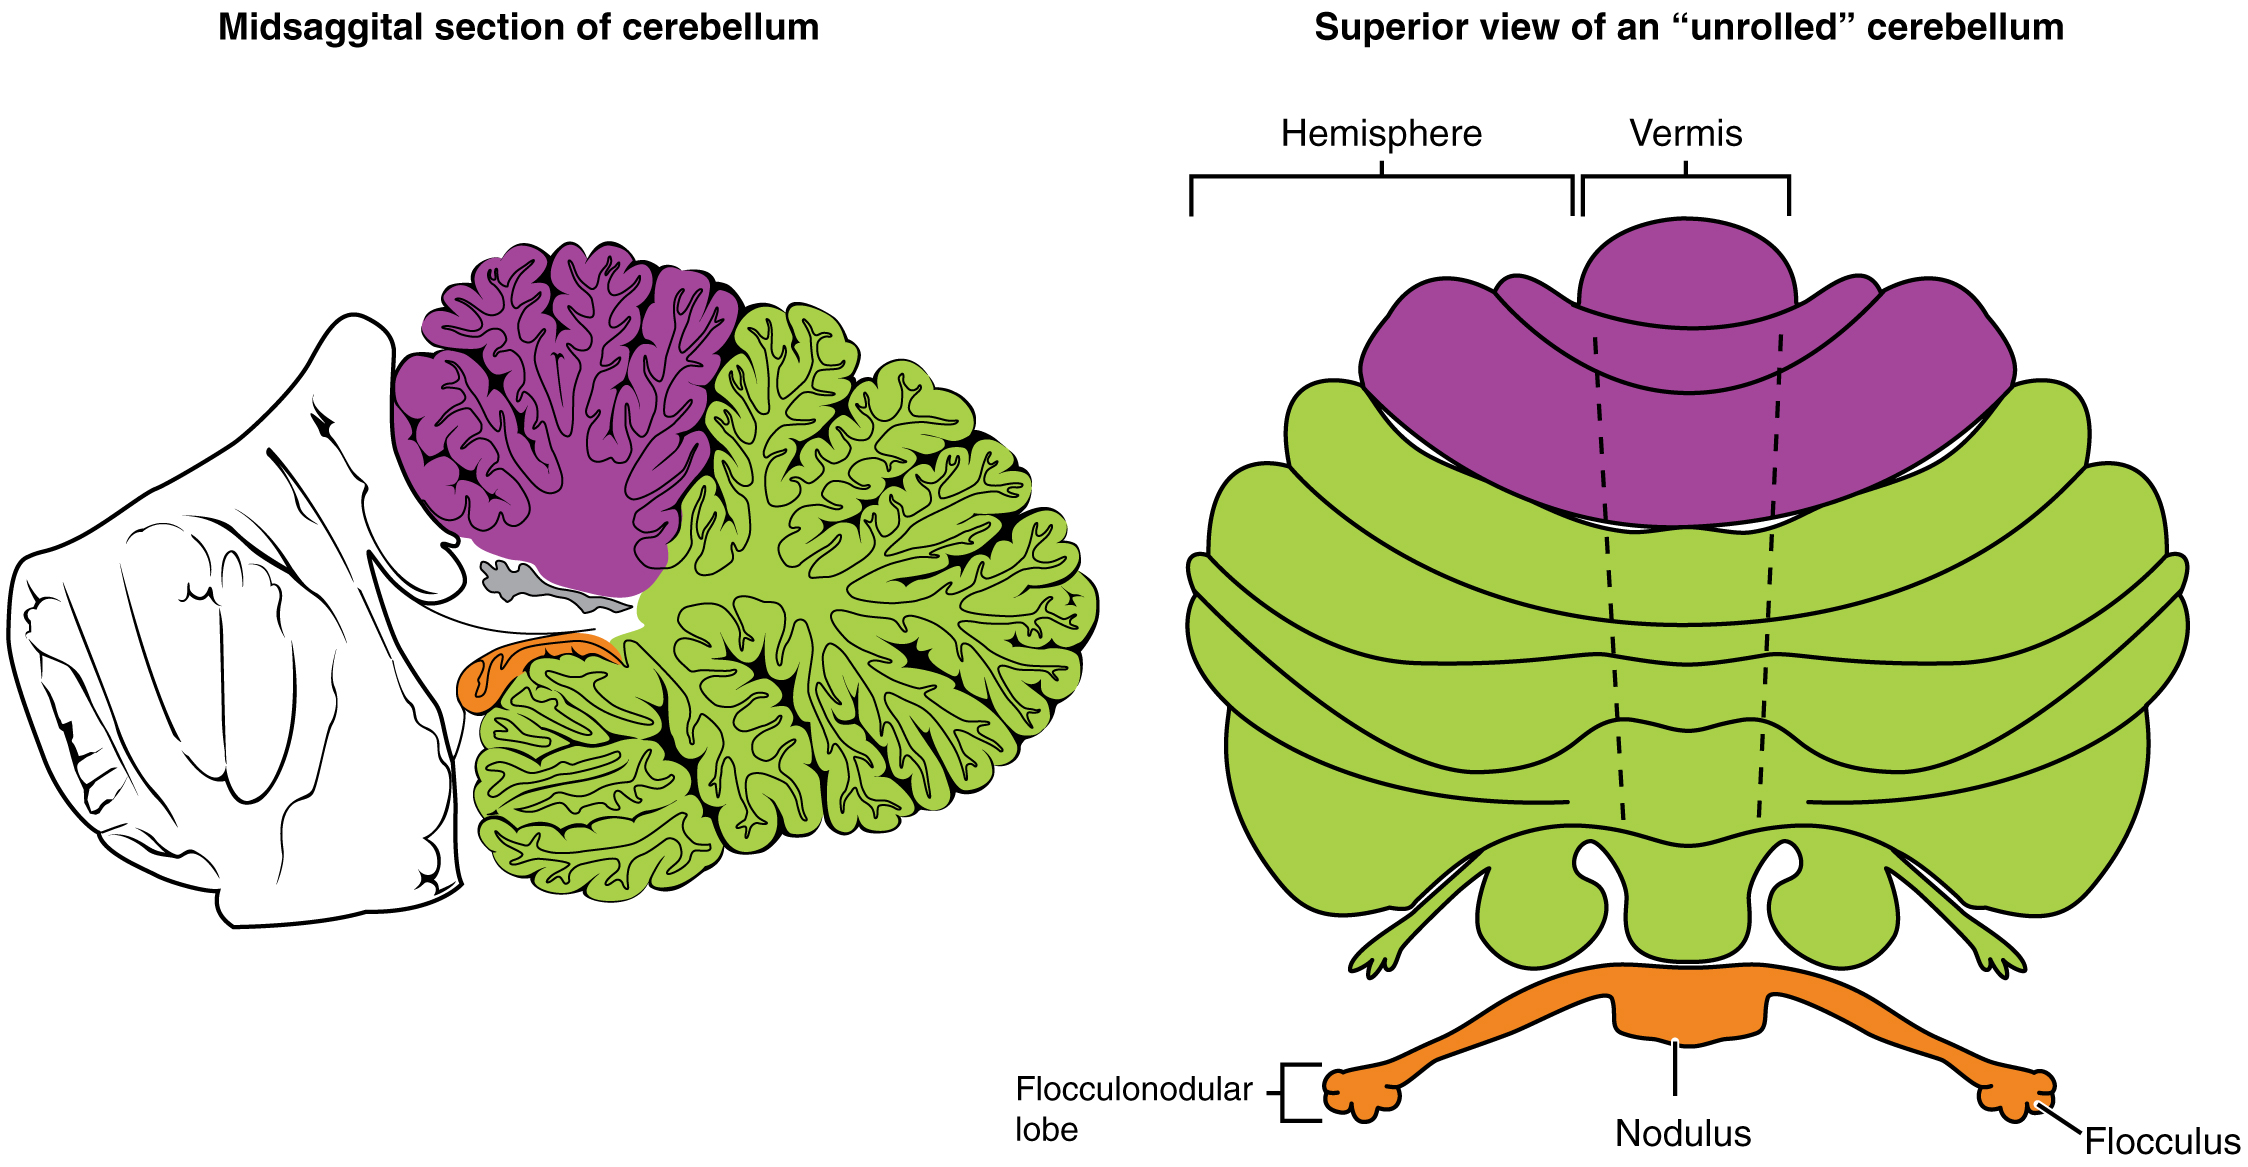 Midsagittal section on the left and superior view on the right with vermis and hemispheres.